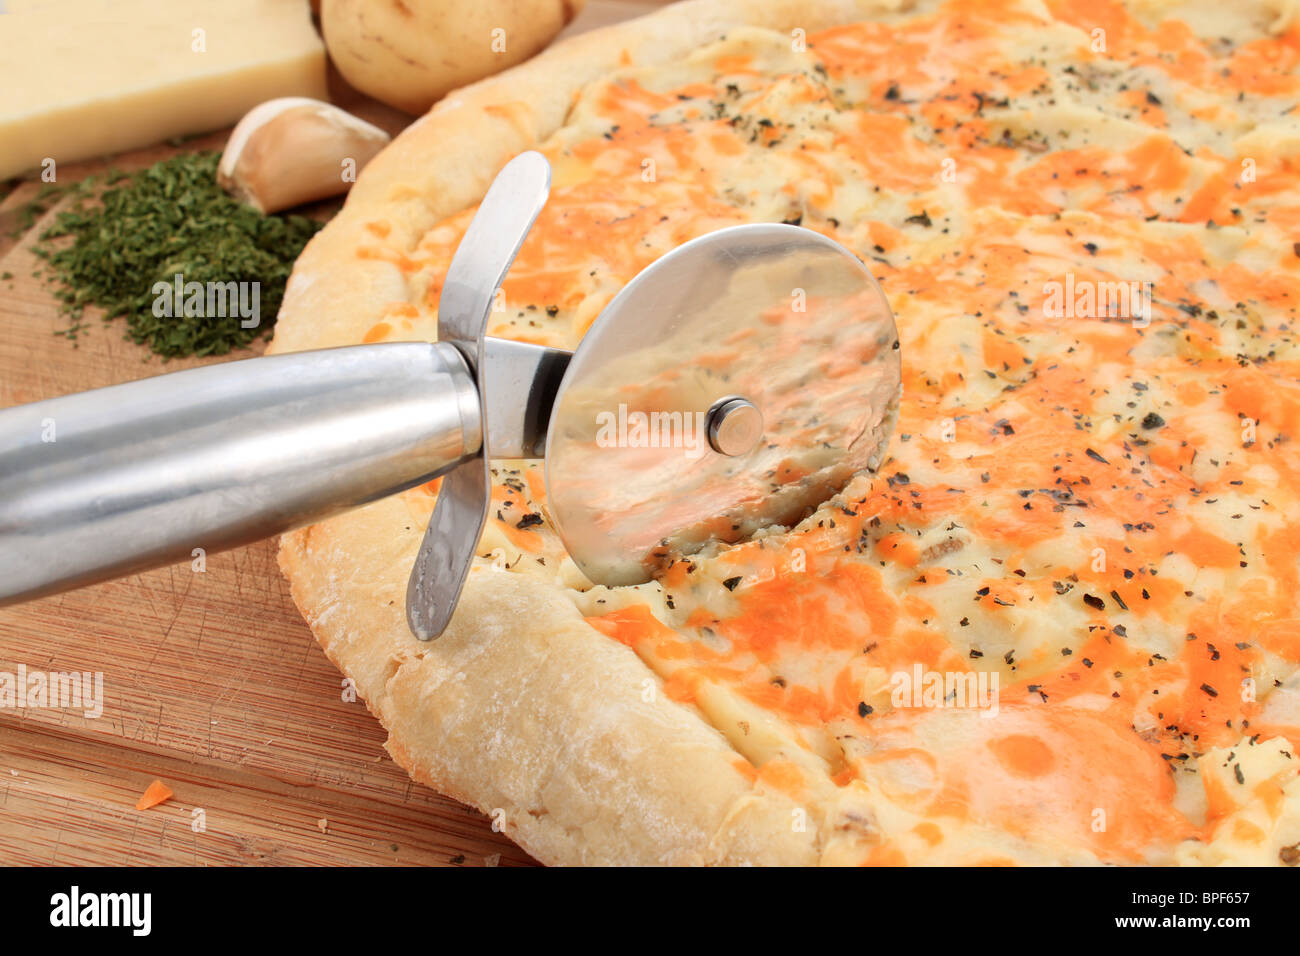 Silver cutter cutting through gourmet pizza made with fresh dough, potatoes, cheese, and garlic with seasoning Stock Photo